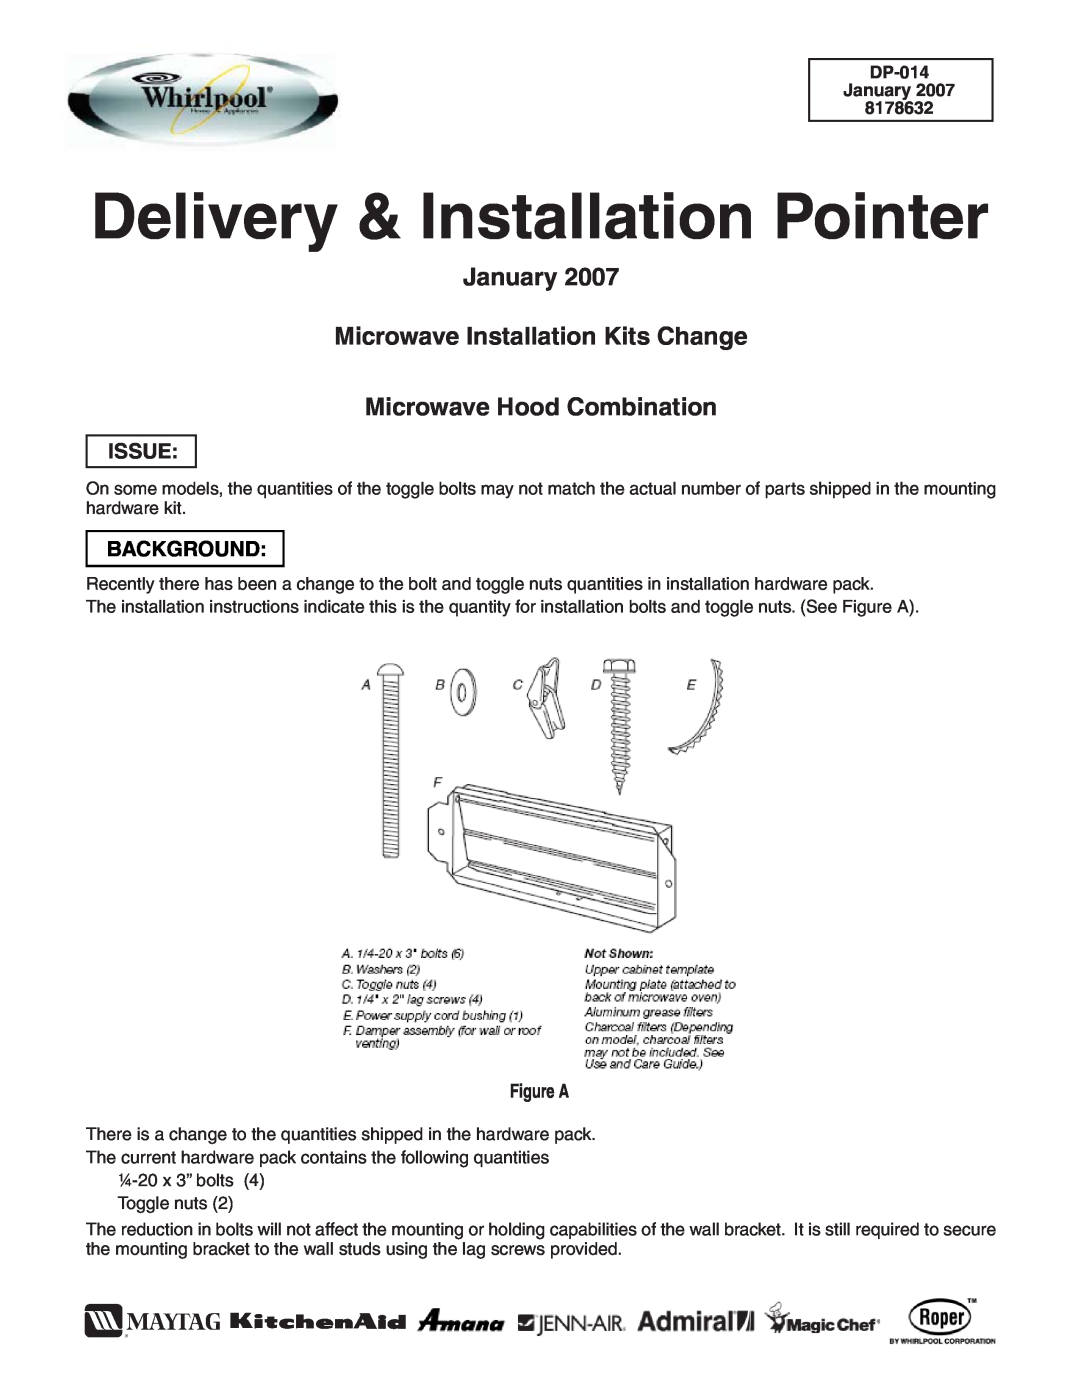 Whirlpool DP-014 installation instructions January Microwave Installation Kits Change, Microwave Hood Combination, Issue 